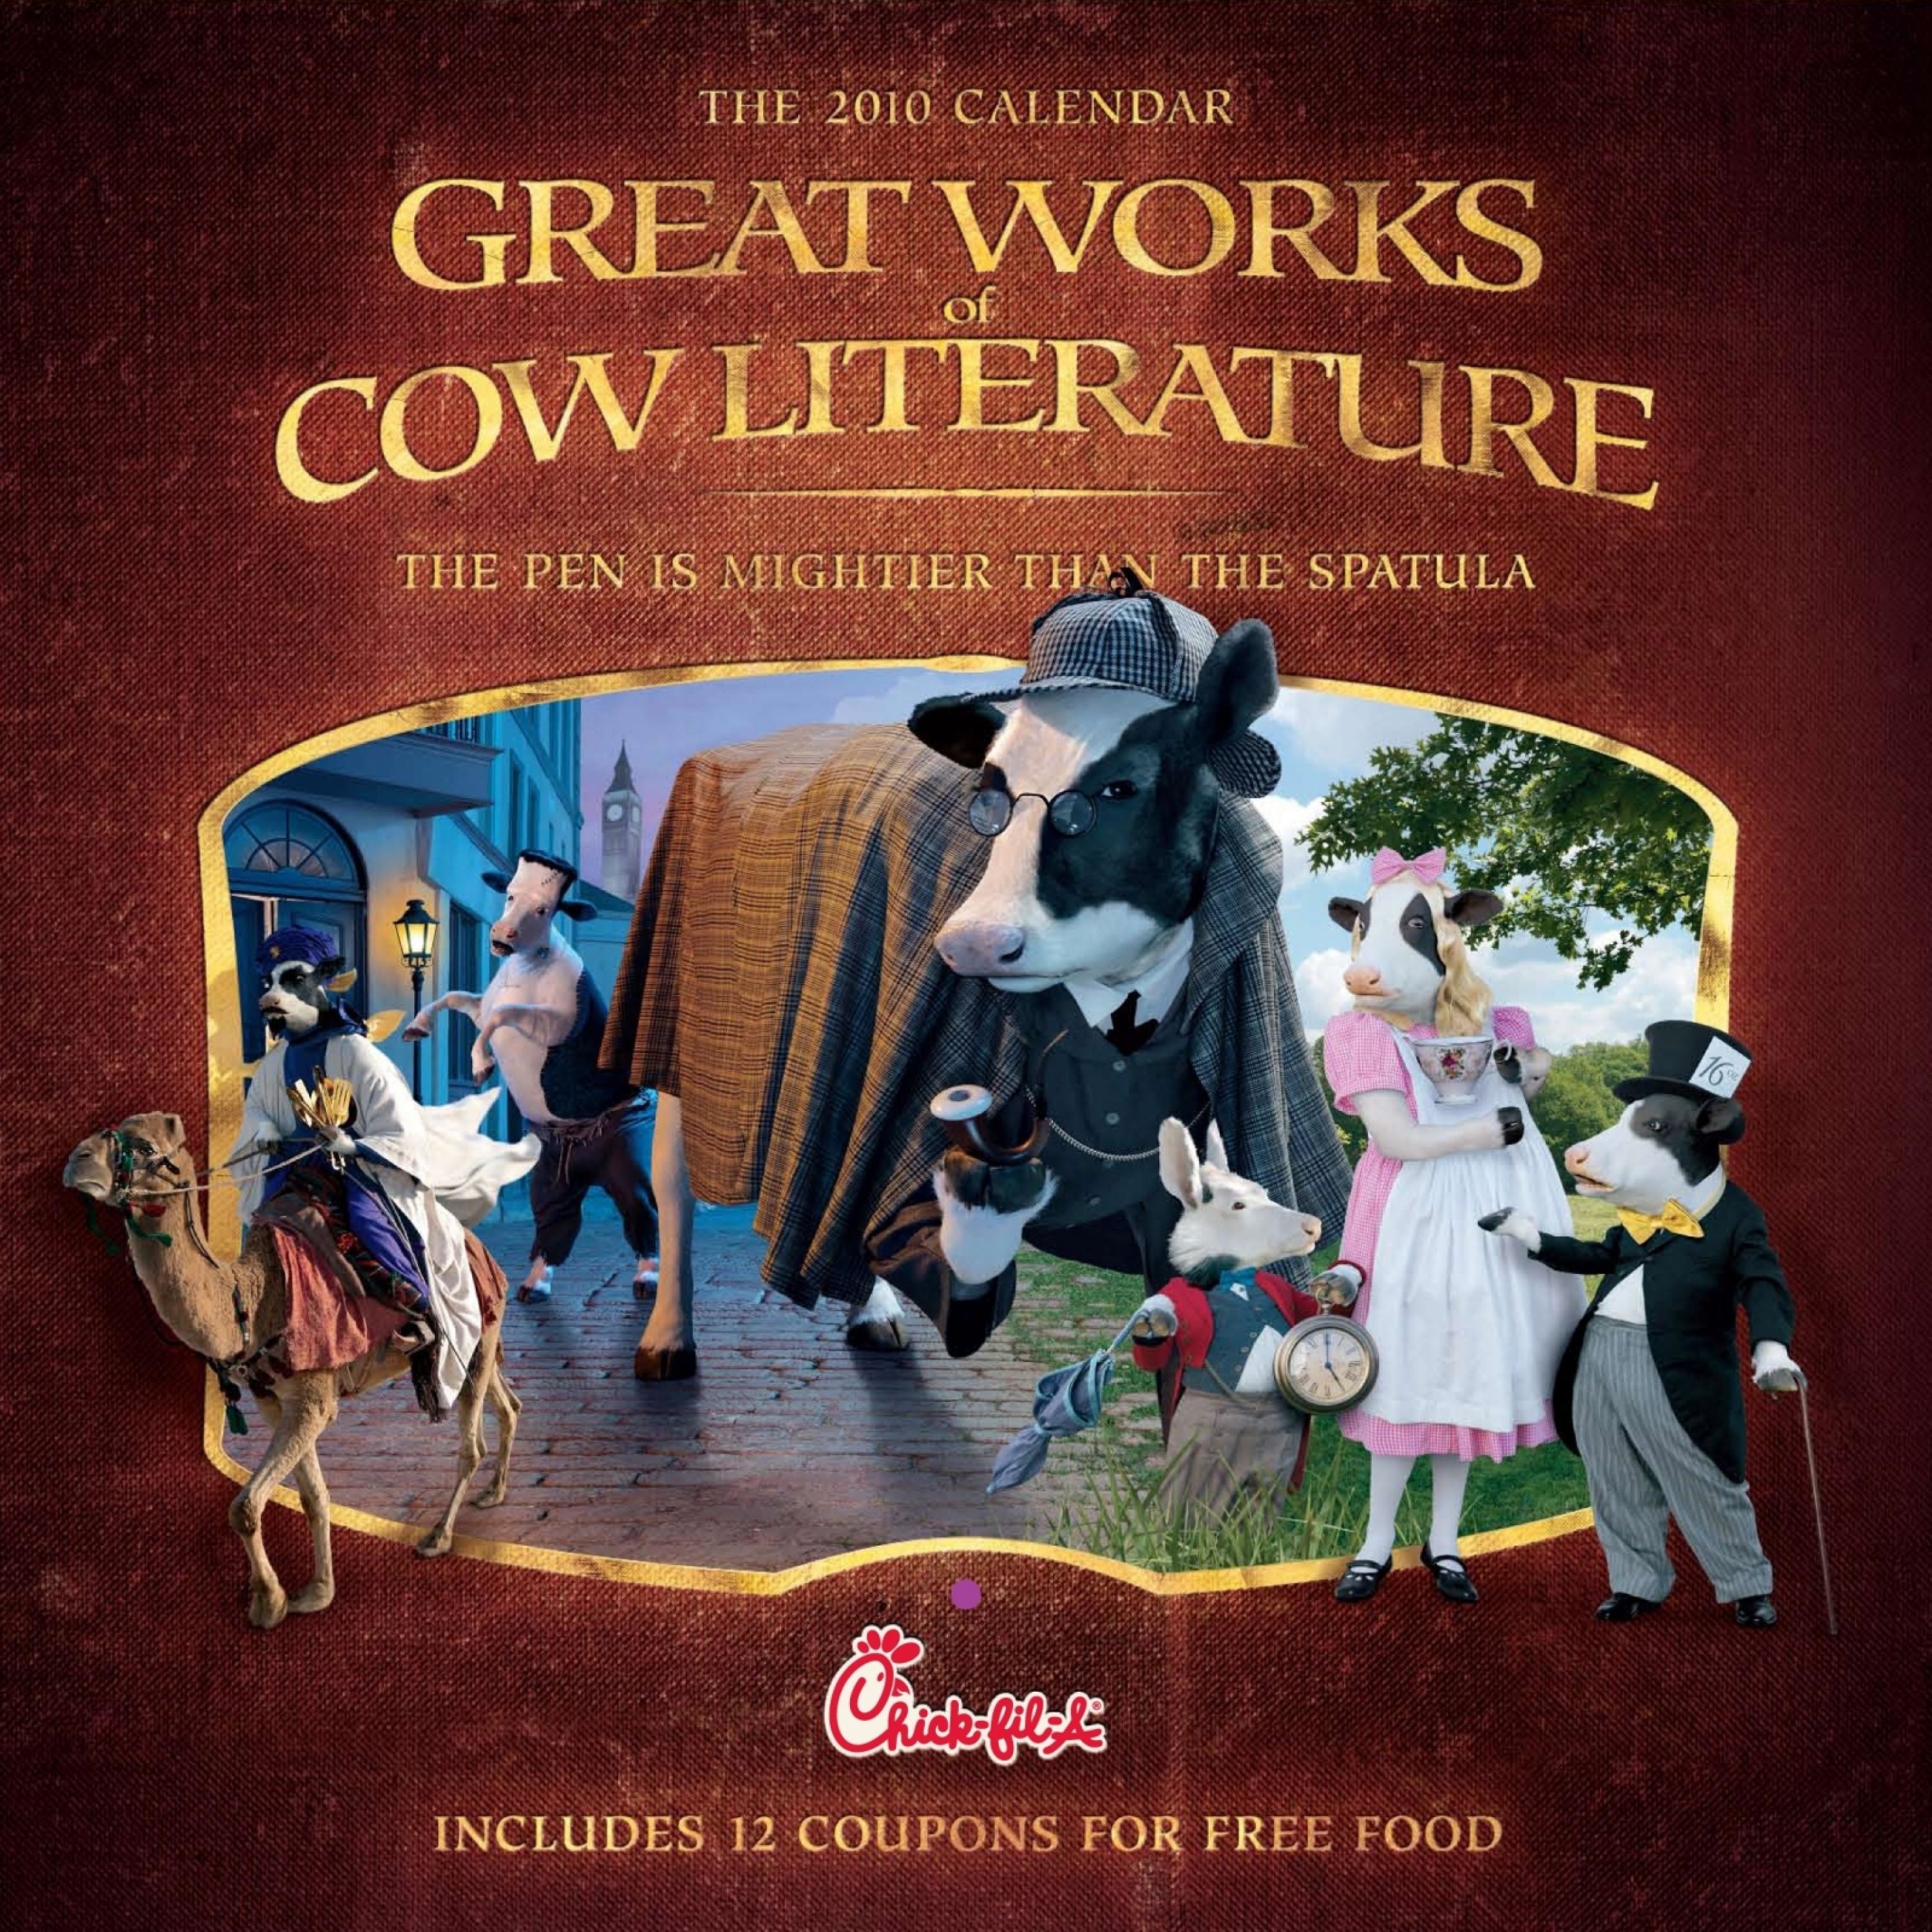 GREAT WORKS OF COW LITERATURE